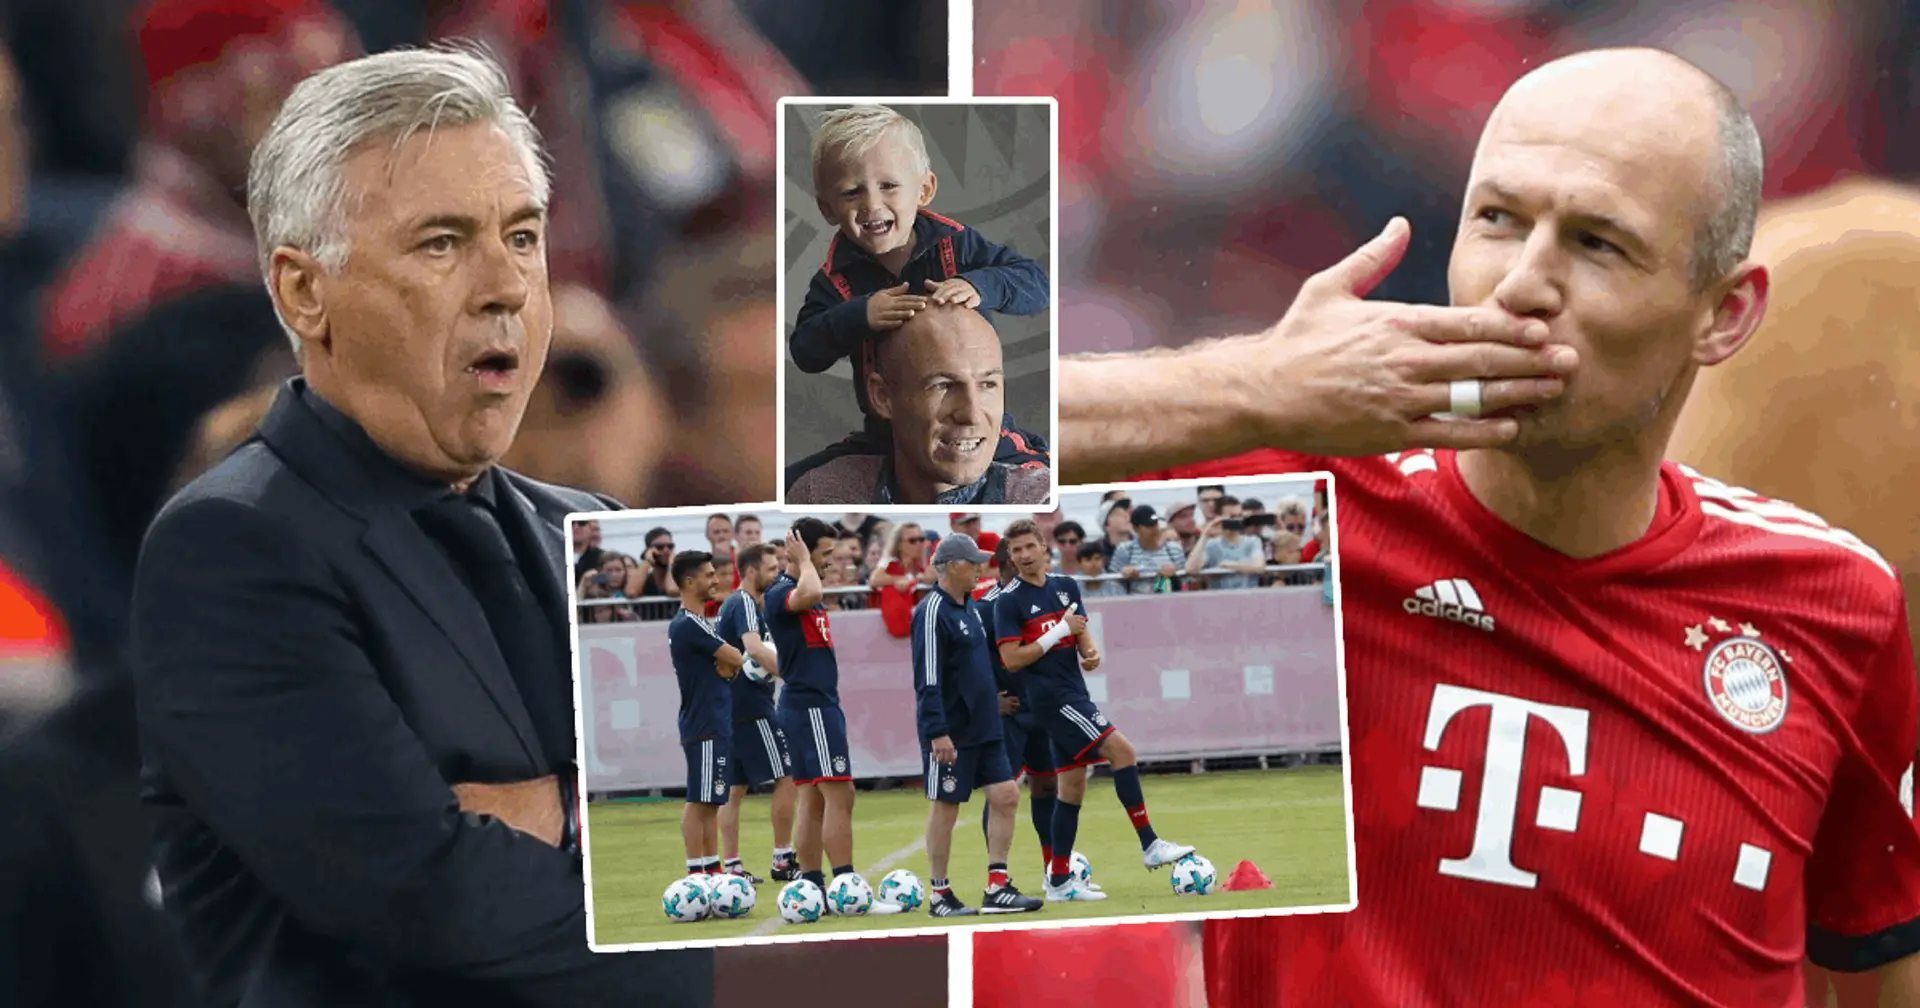 'There’s better training at my son’s youth team': How Ancelotti lost Bayern squad with low-intensity training